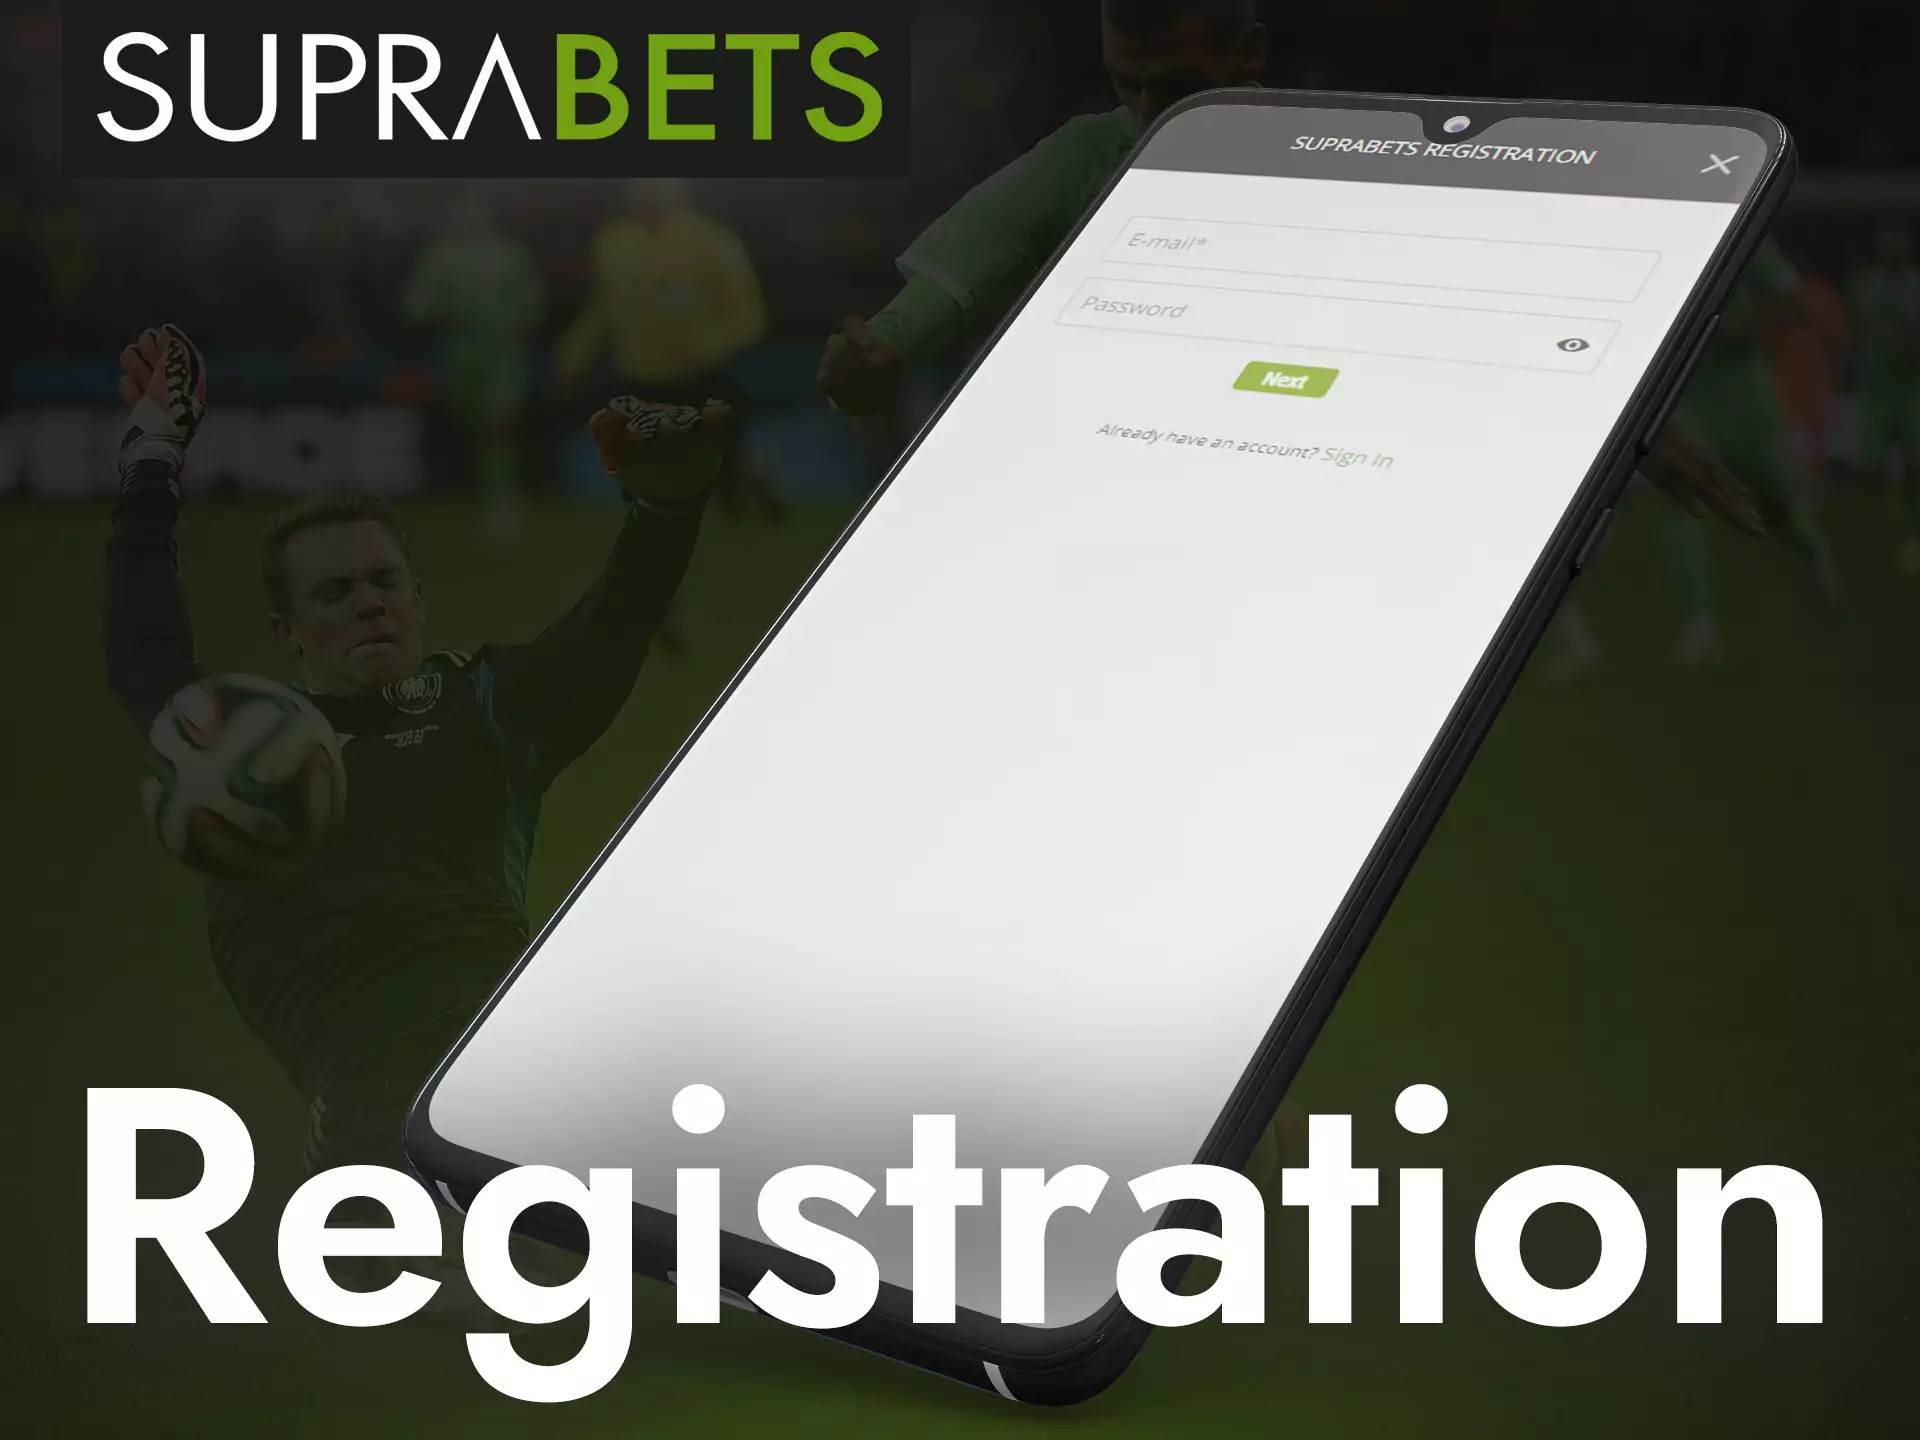 Go through a simple and quick registration on Suprabets to use all the features.